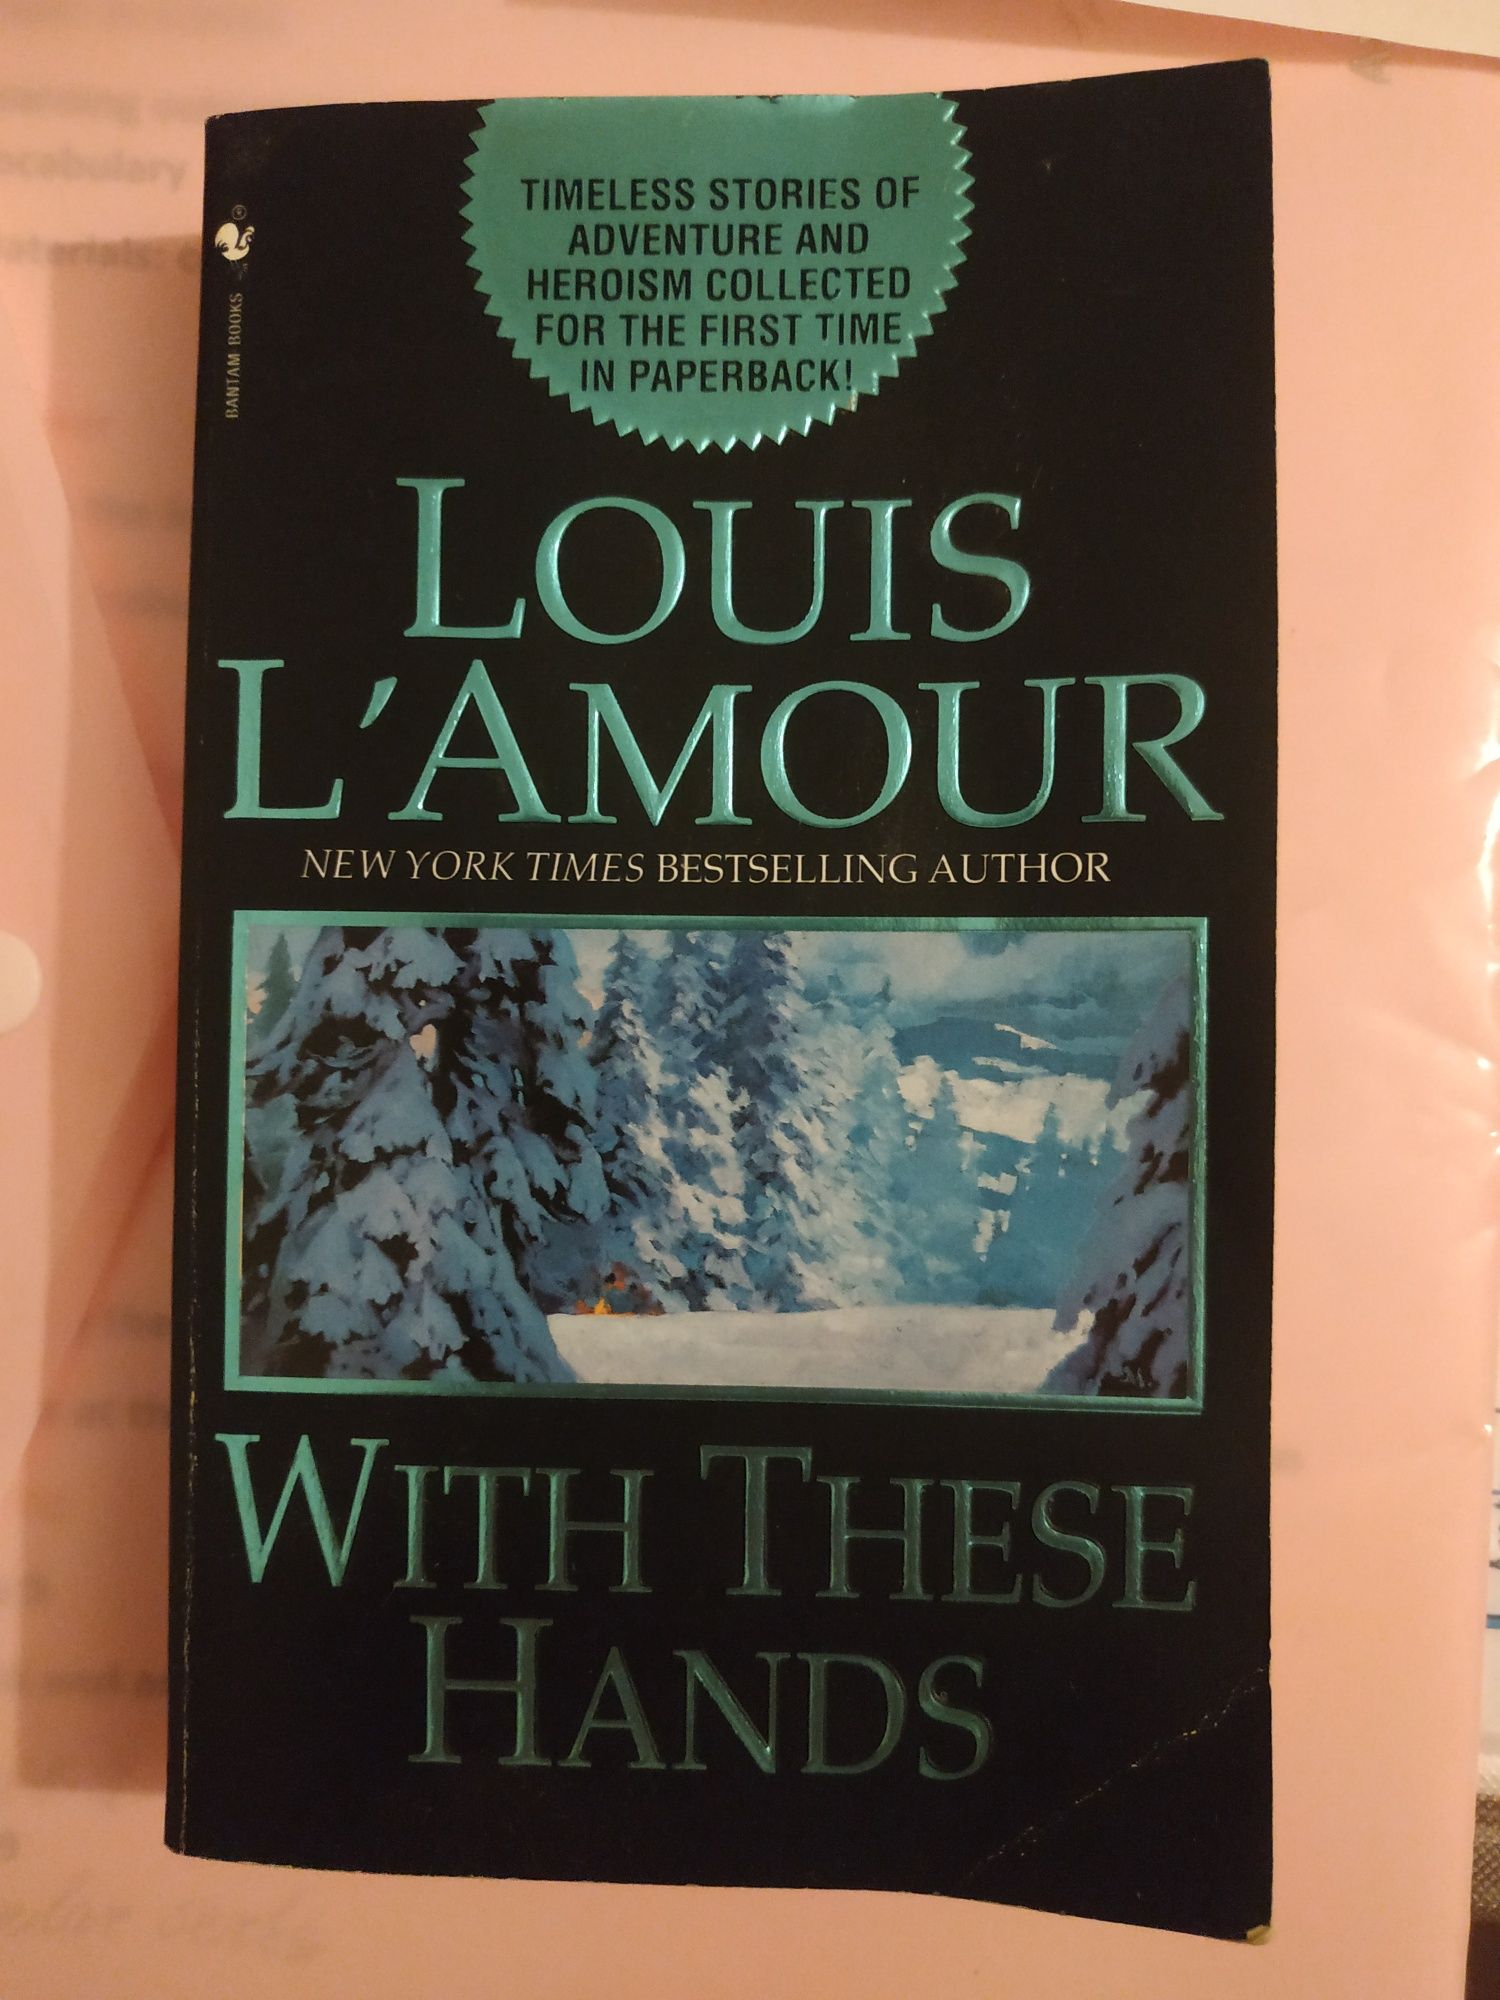 Louis L'amour "With this hands"